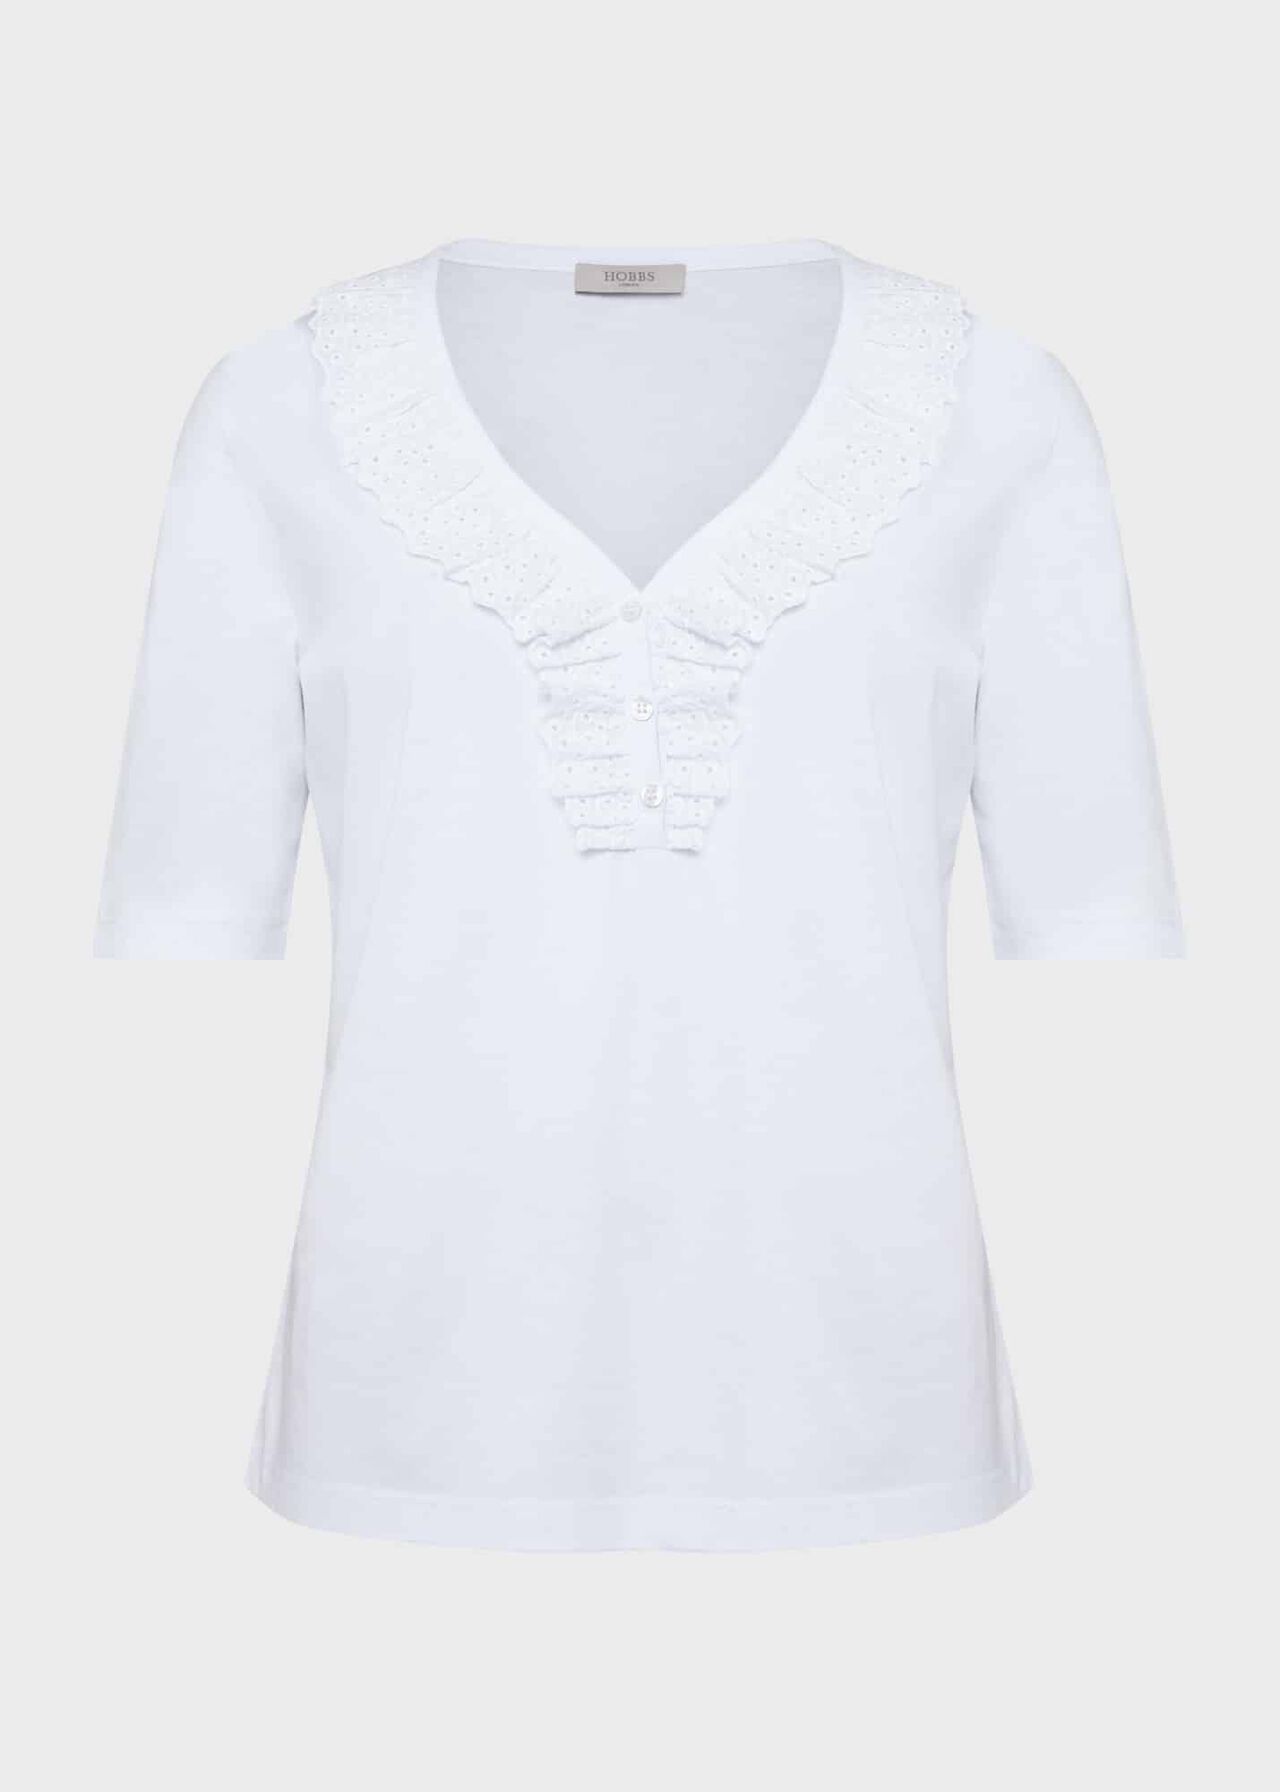 Demi Broderie Top, White, hi-res